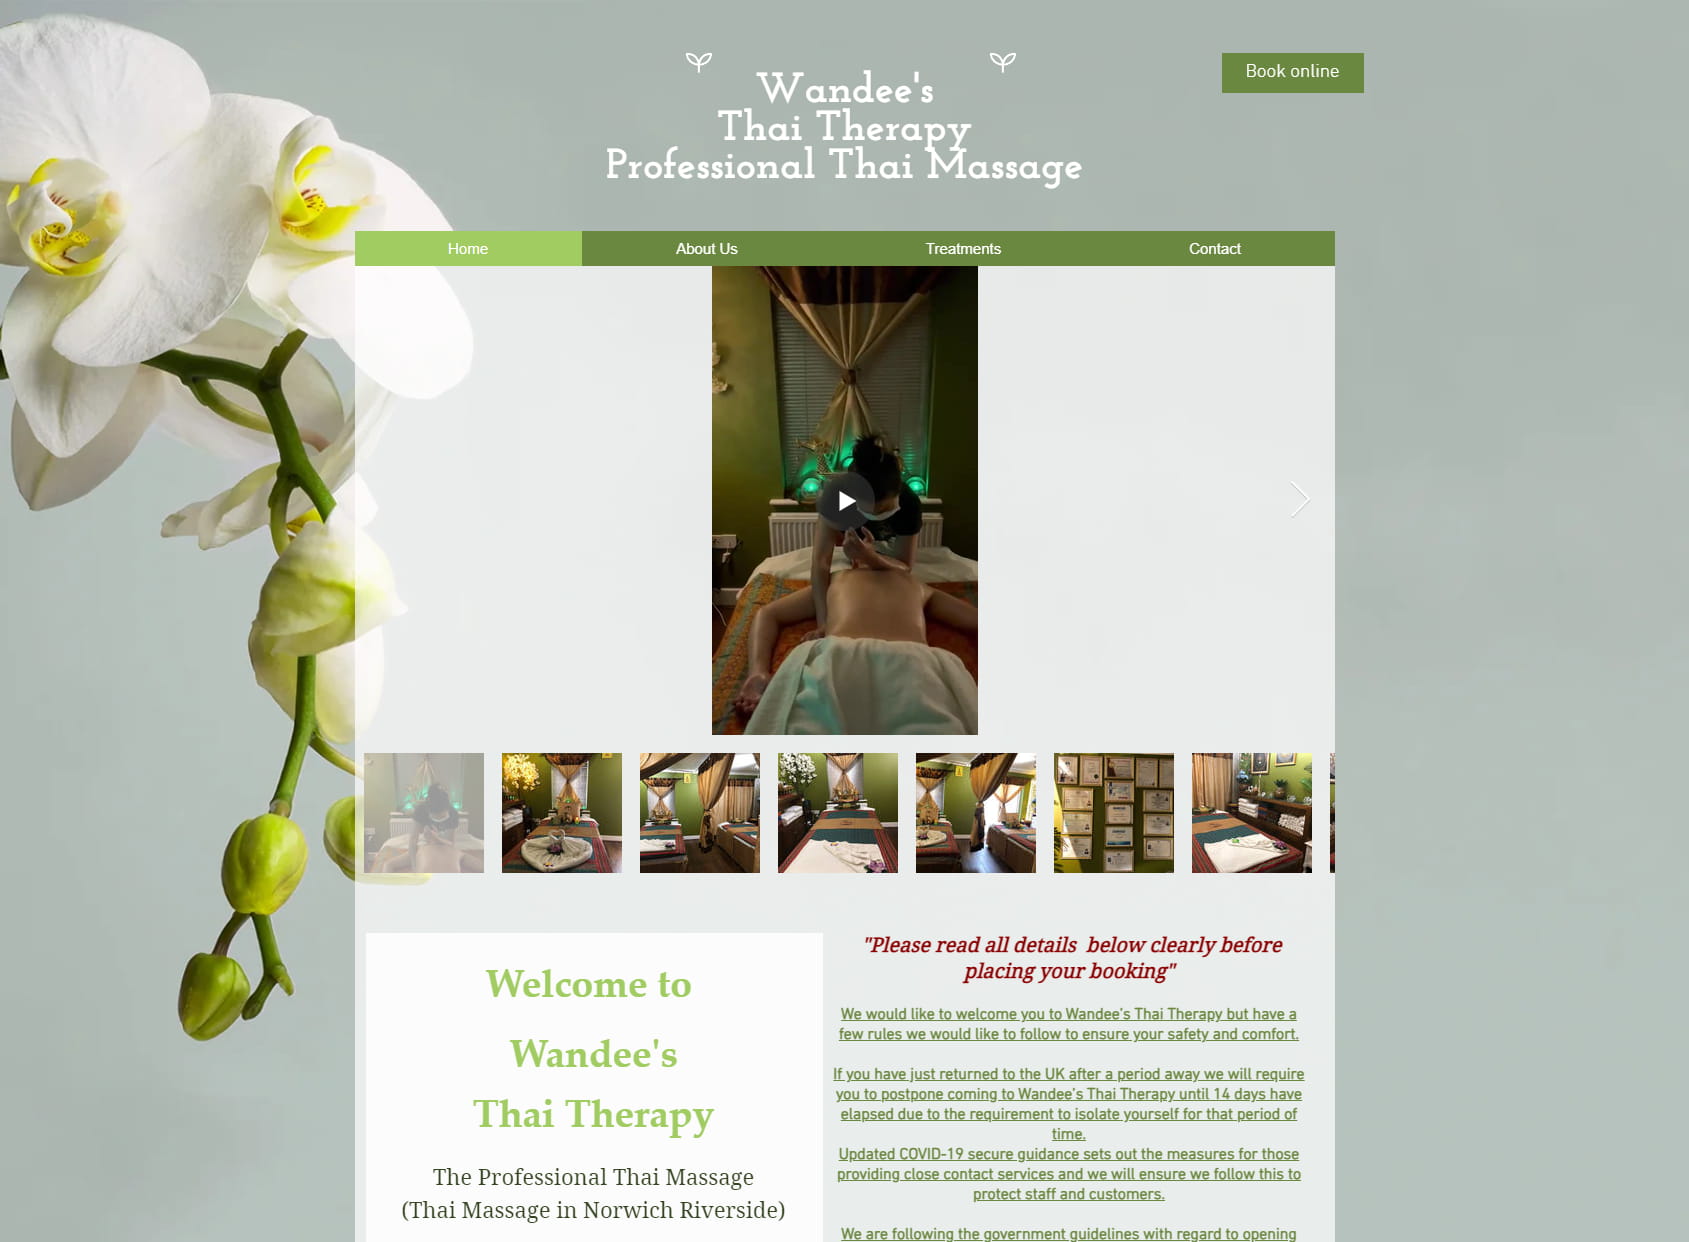 Wandee's Thai Therapy